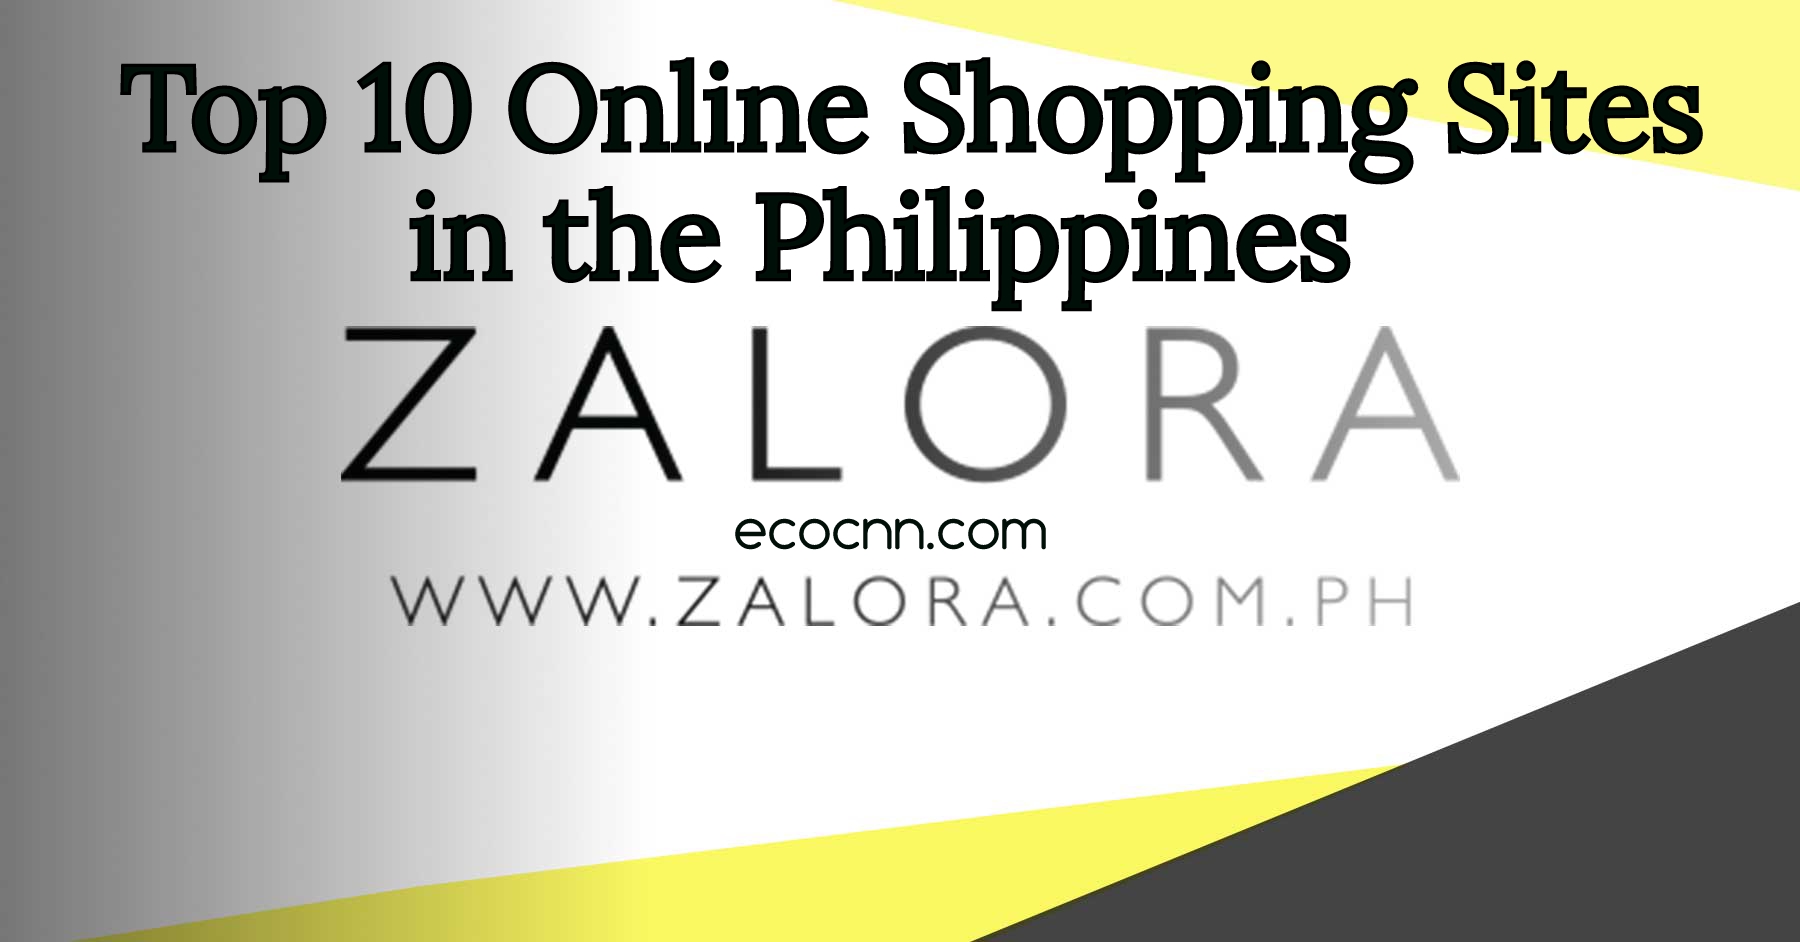 Top 10 Online Shopping Sites in the Philippines 2022